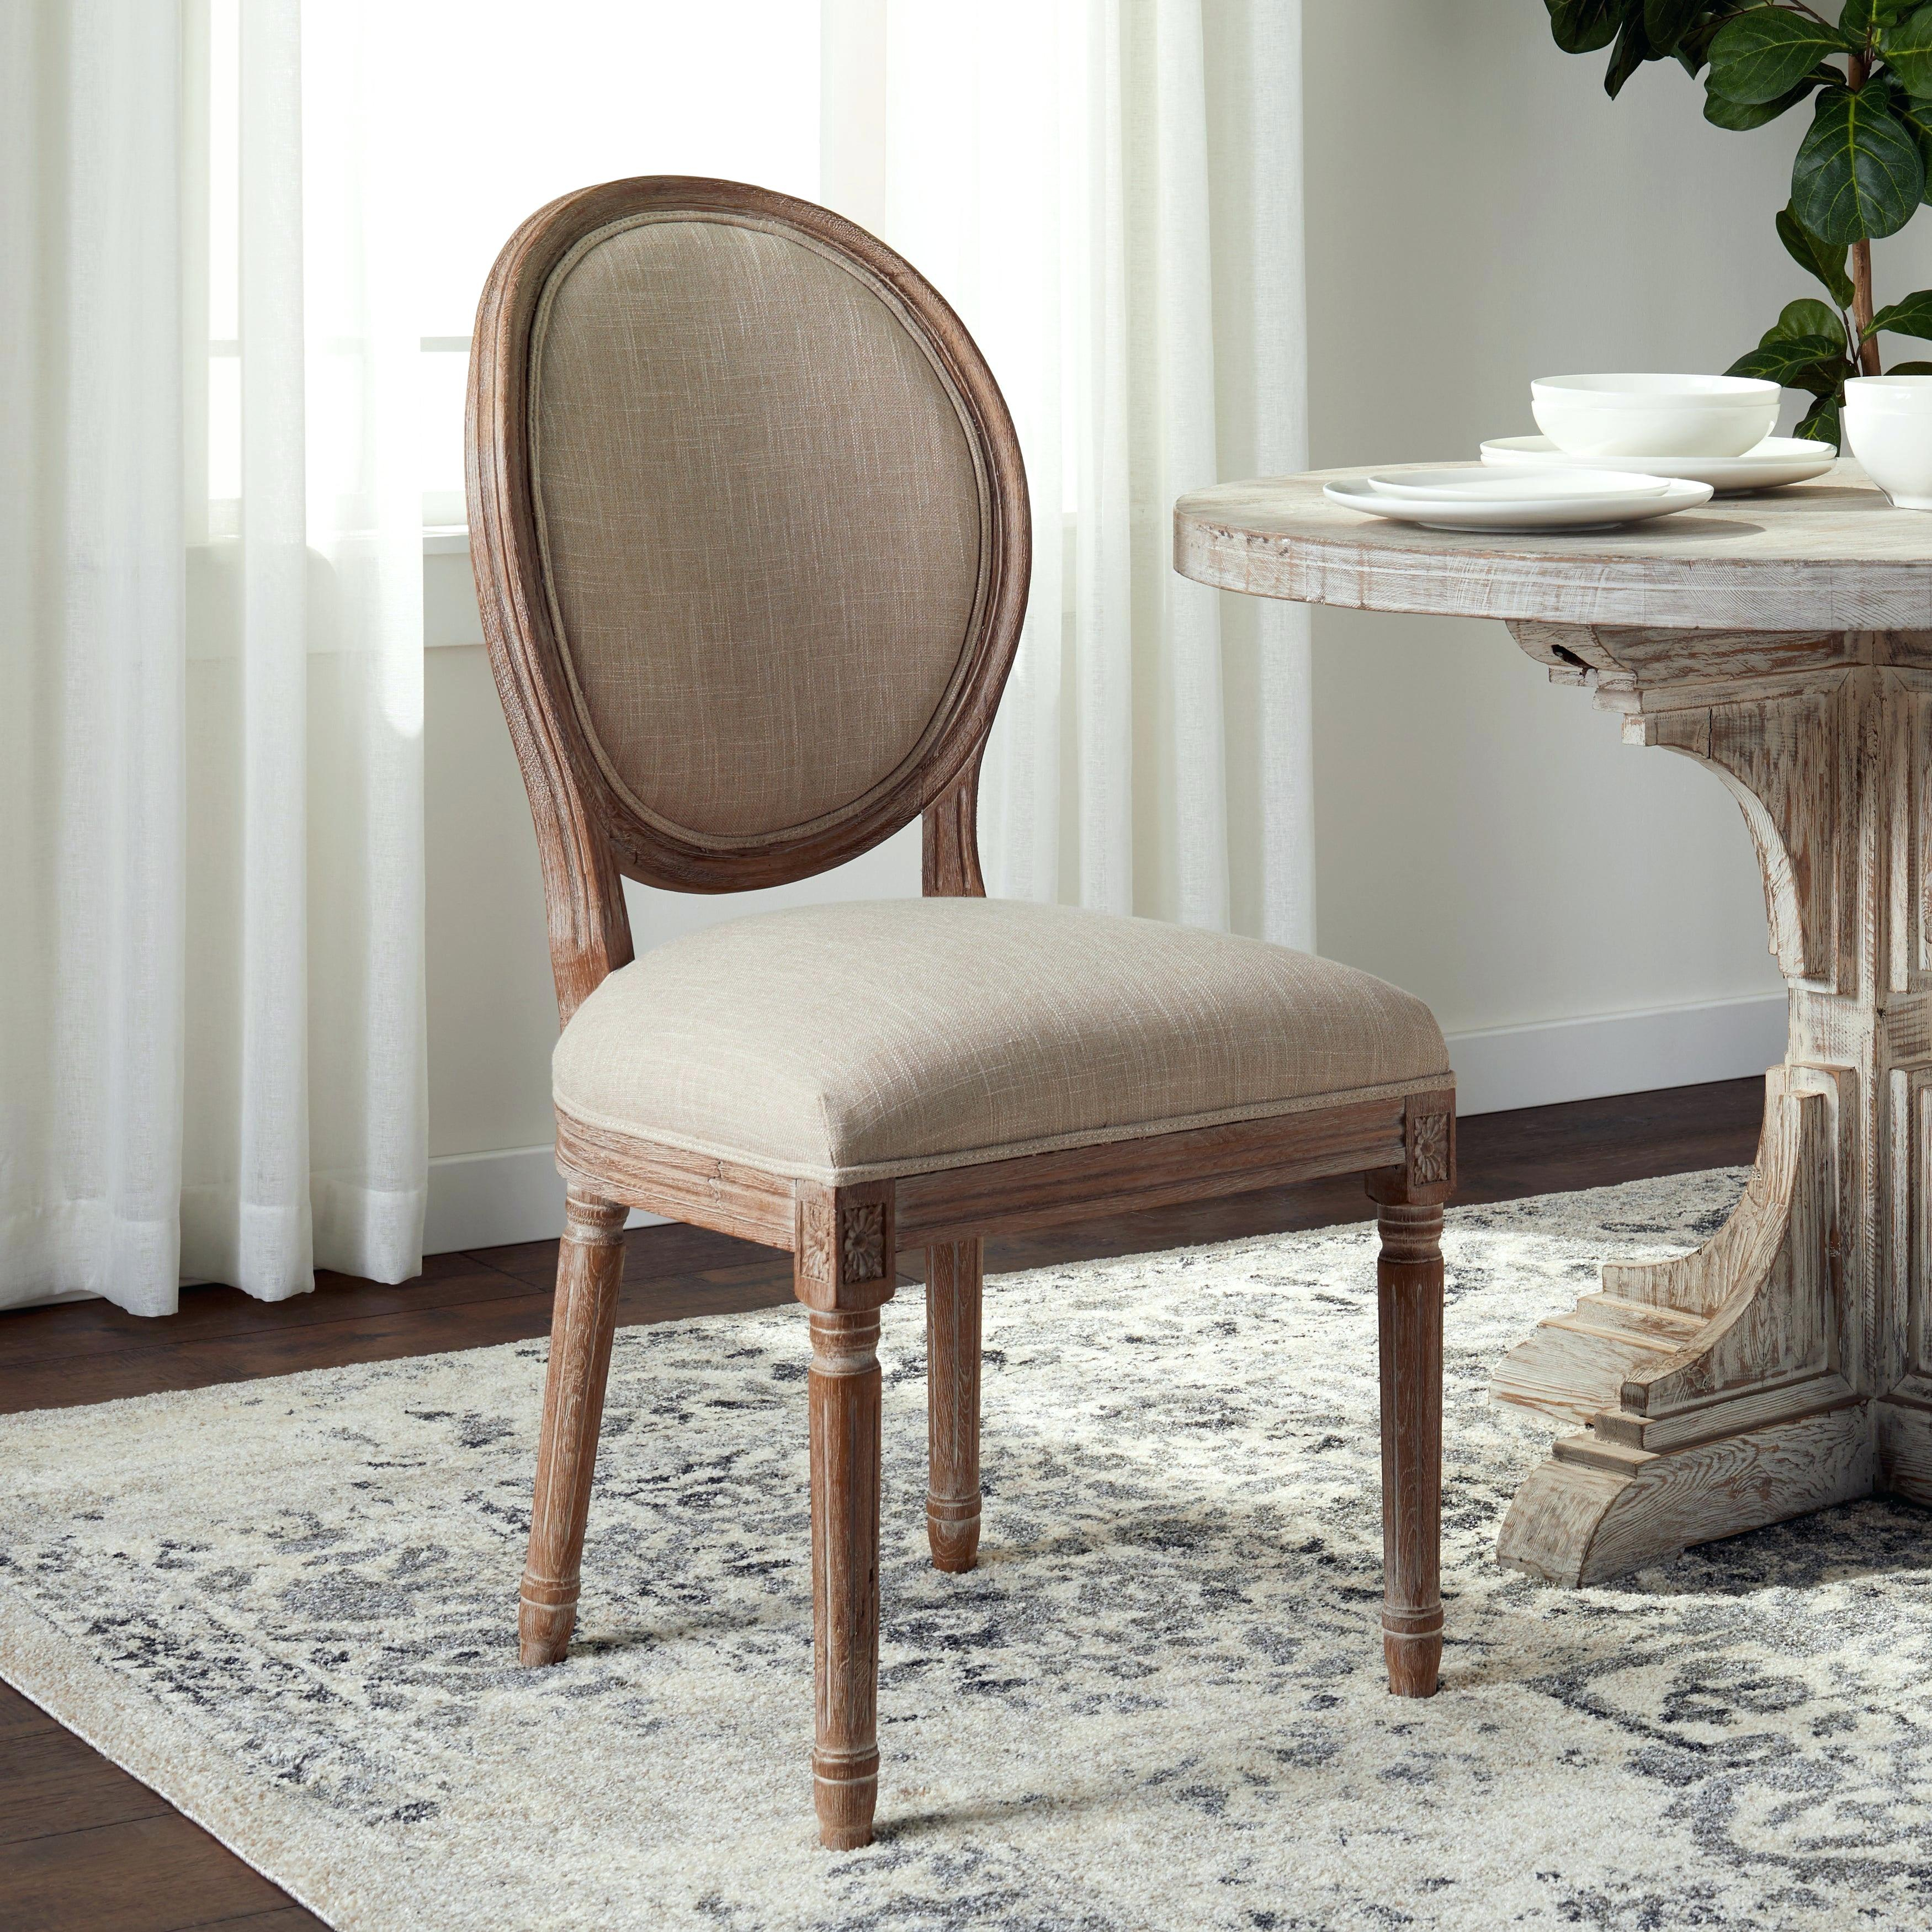 Best Dining Chairs Vallyviewco intended for sizing 3500 X 3500